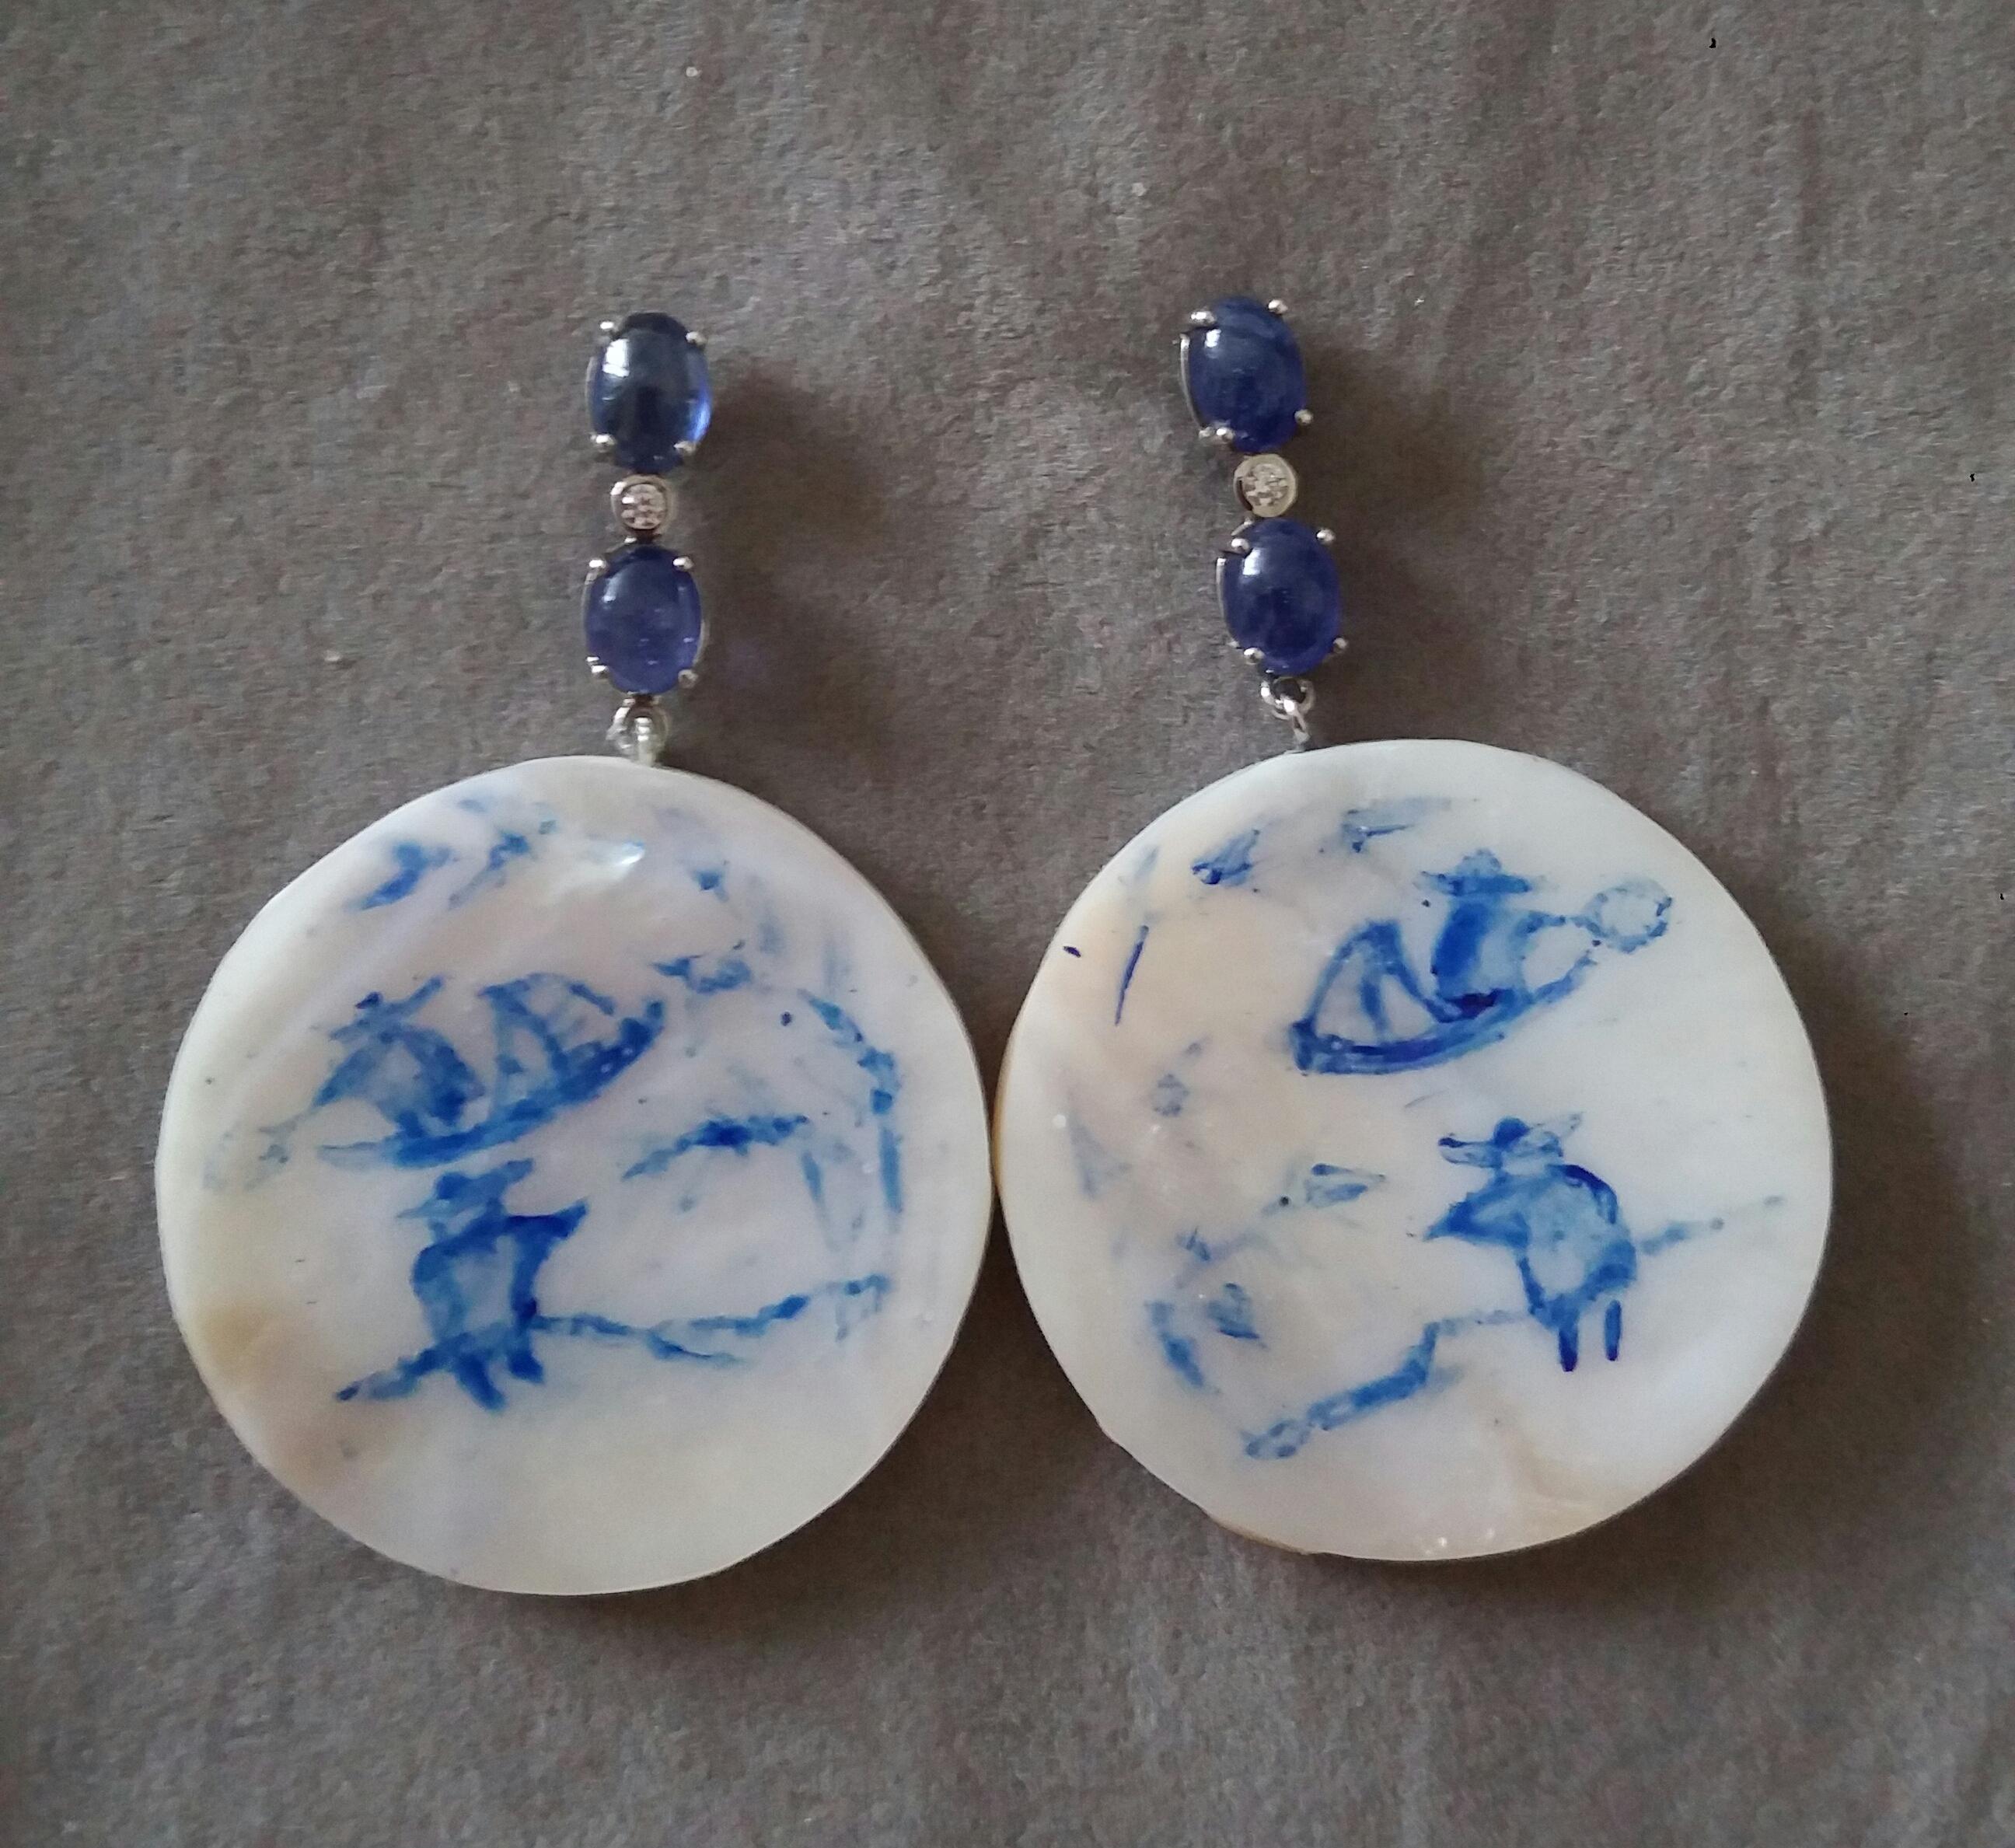 Vintage pair of round shape hand painted Mother of Pearl discs depicting a chinese landscape,2 fishermen and a boat on the river,suspended from a gold bar composed by 2 Oval Blue Sapphires and a diamond in the middle.

In 1978 our workshop started